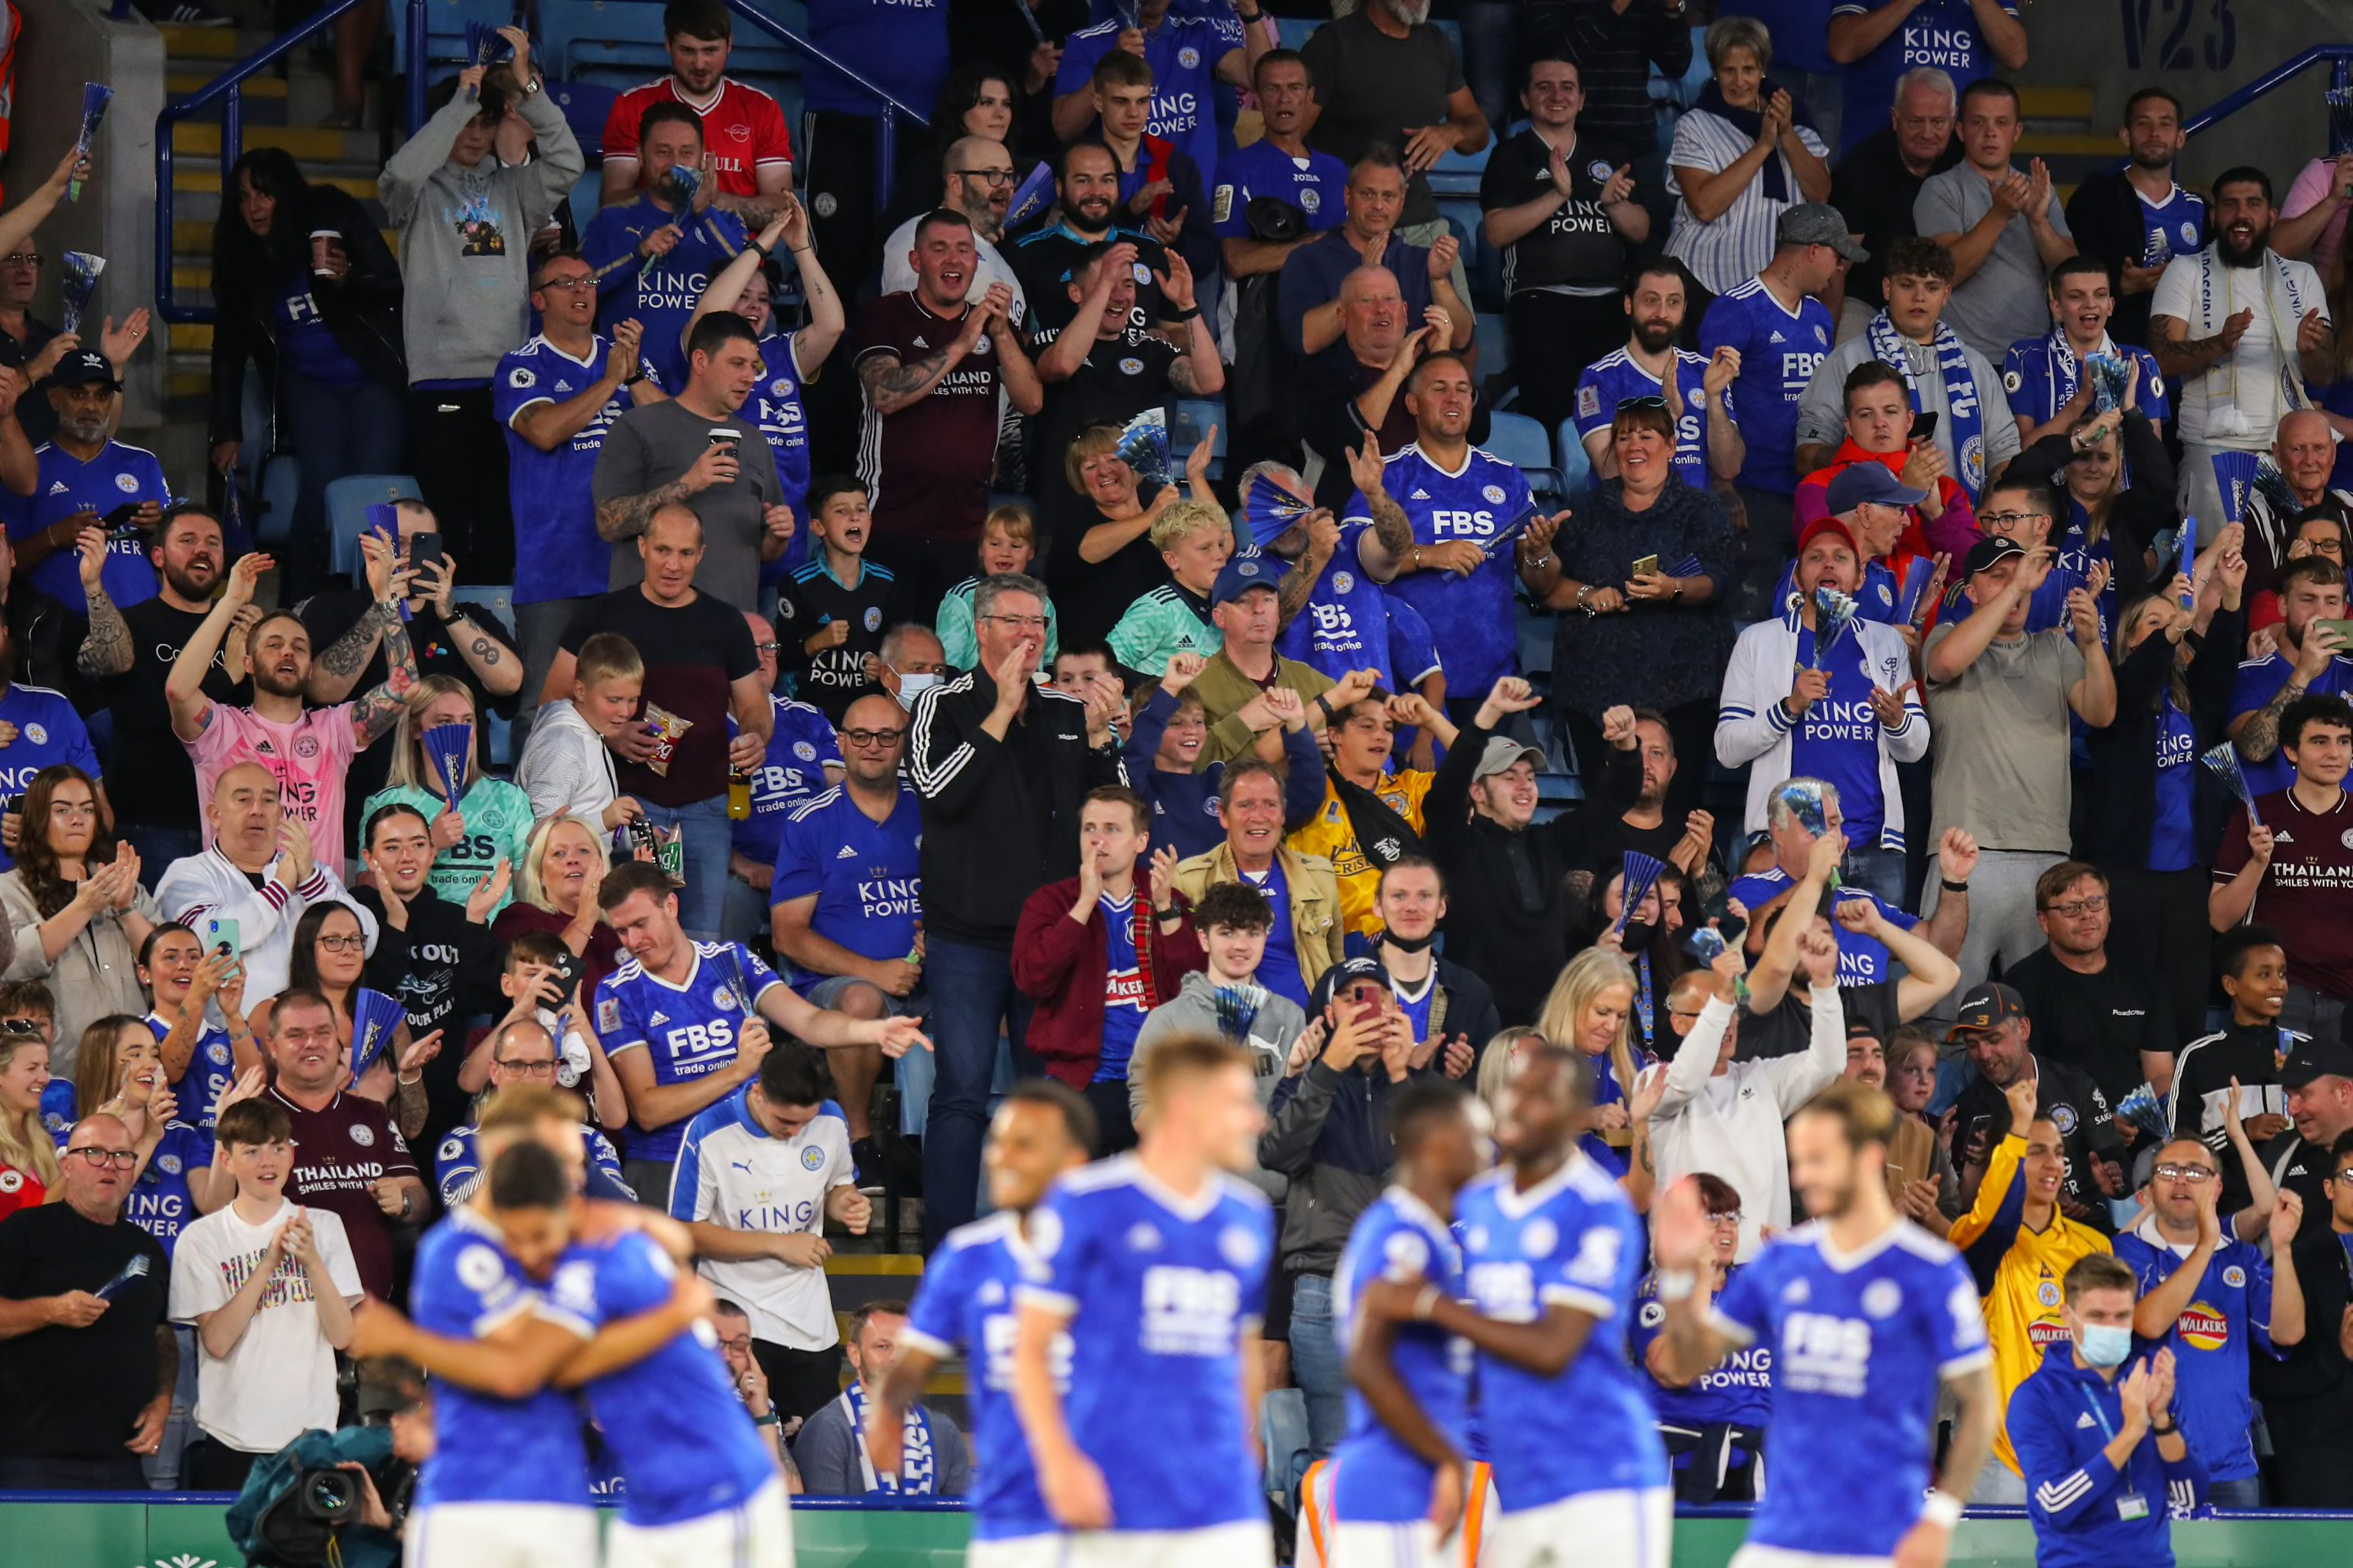 Leicester City v Villarreal dominant win overshadowed by